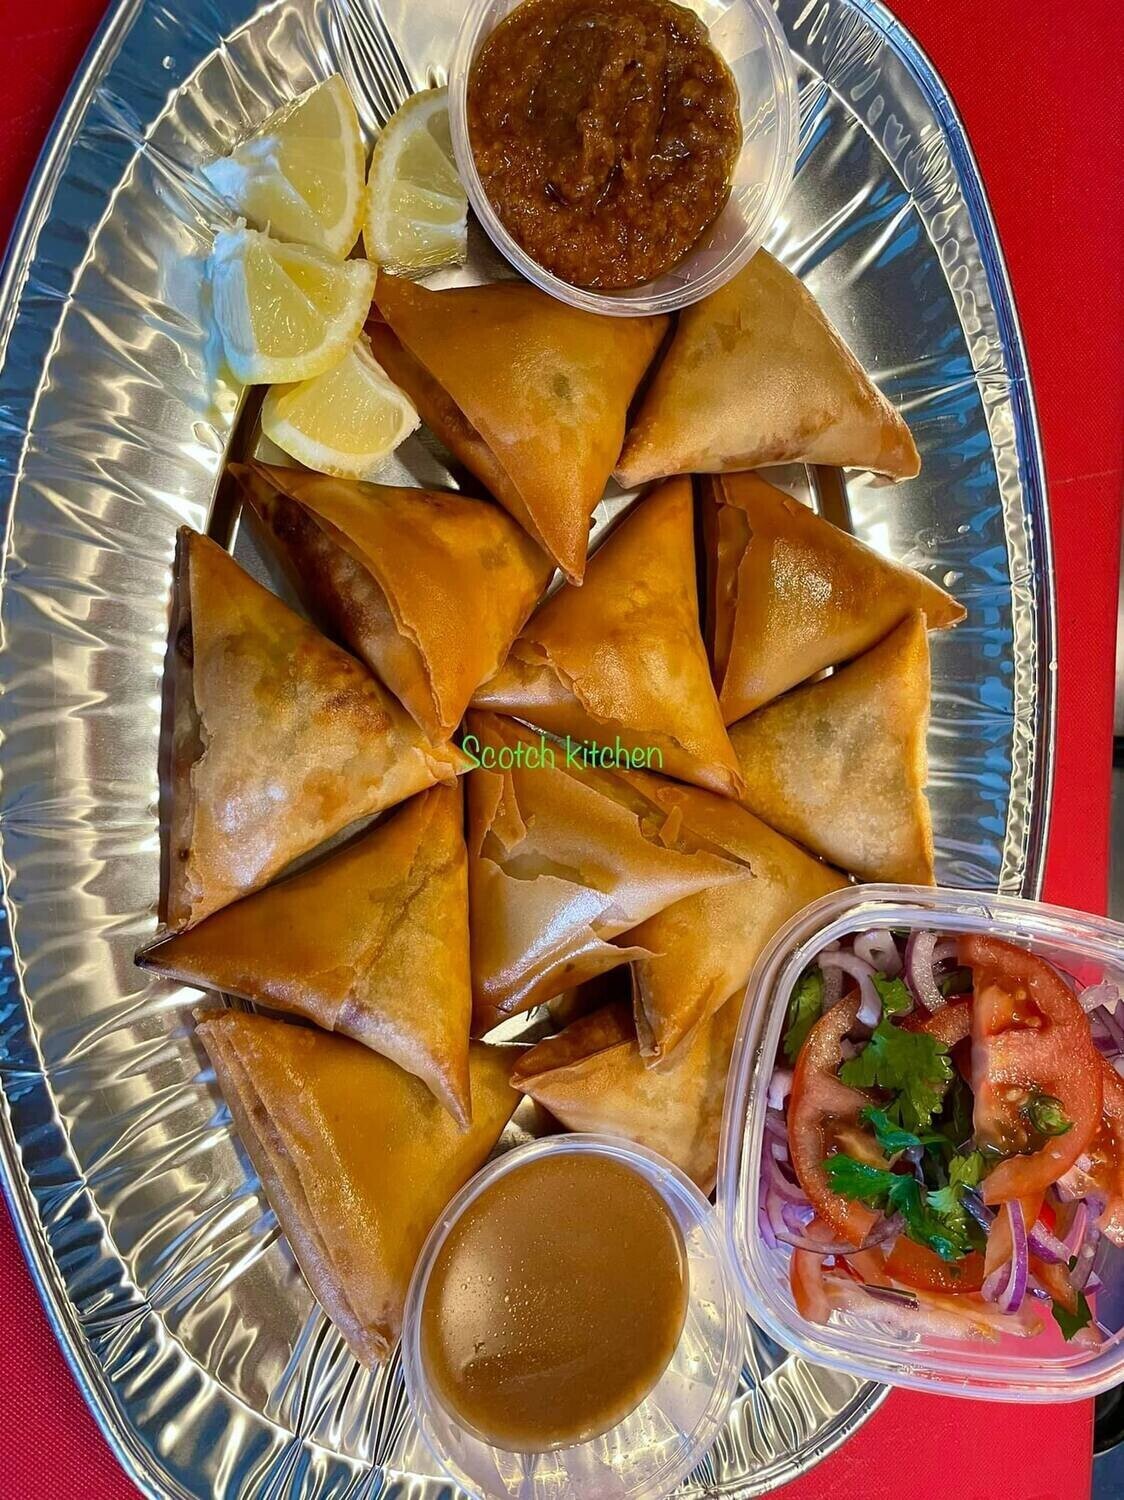 Samosa (Vegetable, Beef or Chicken) 120 kcal per piece